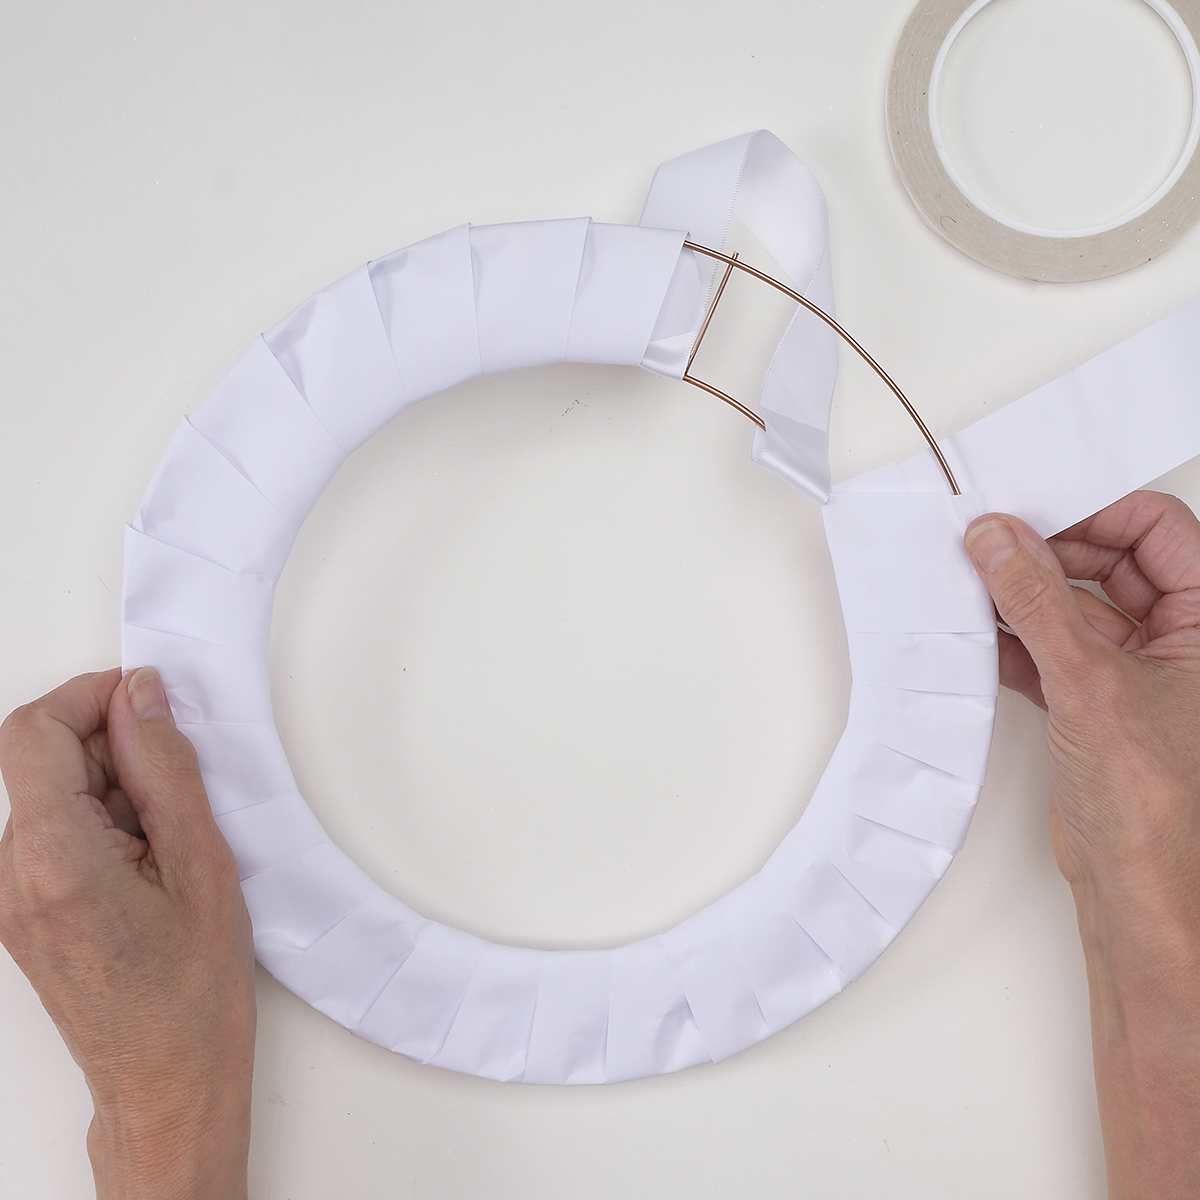 How to make an origami wreath - step 7